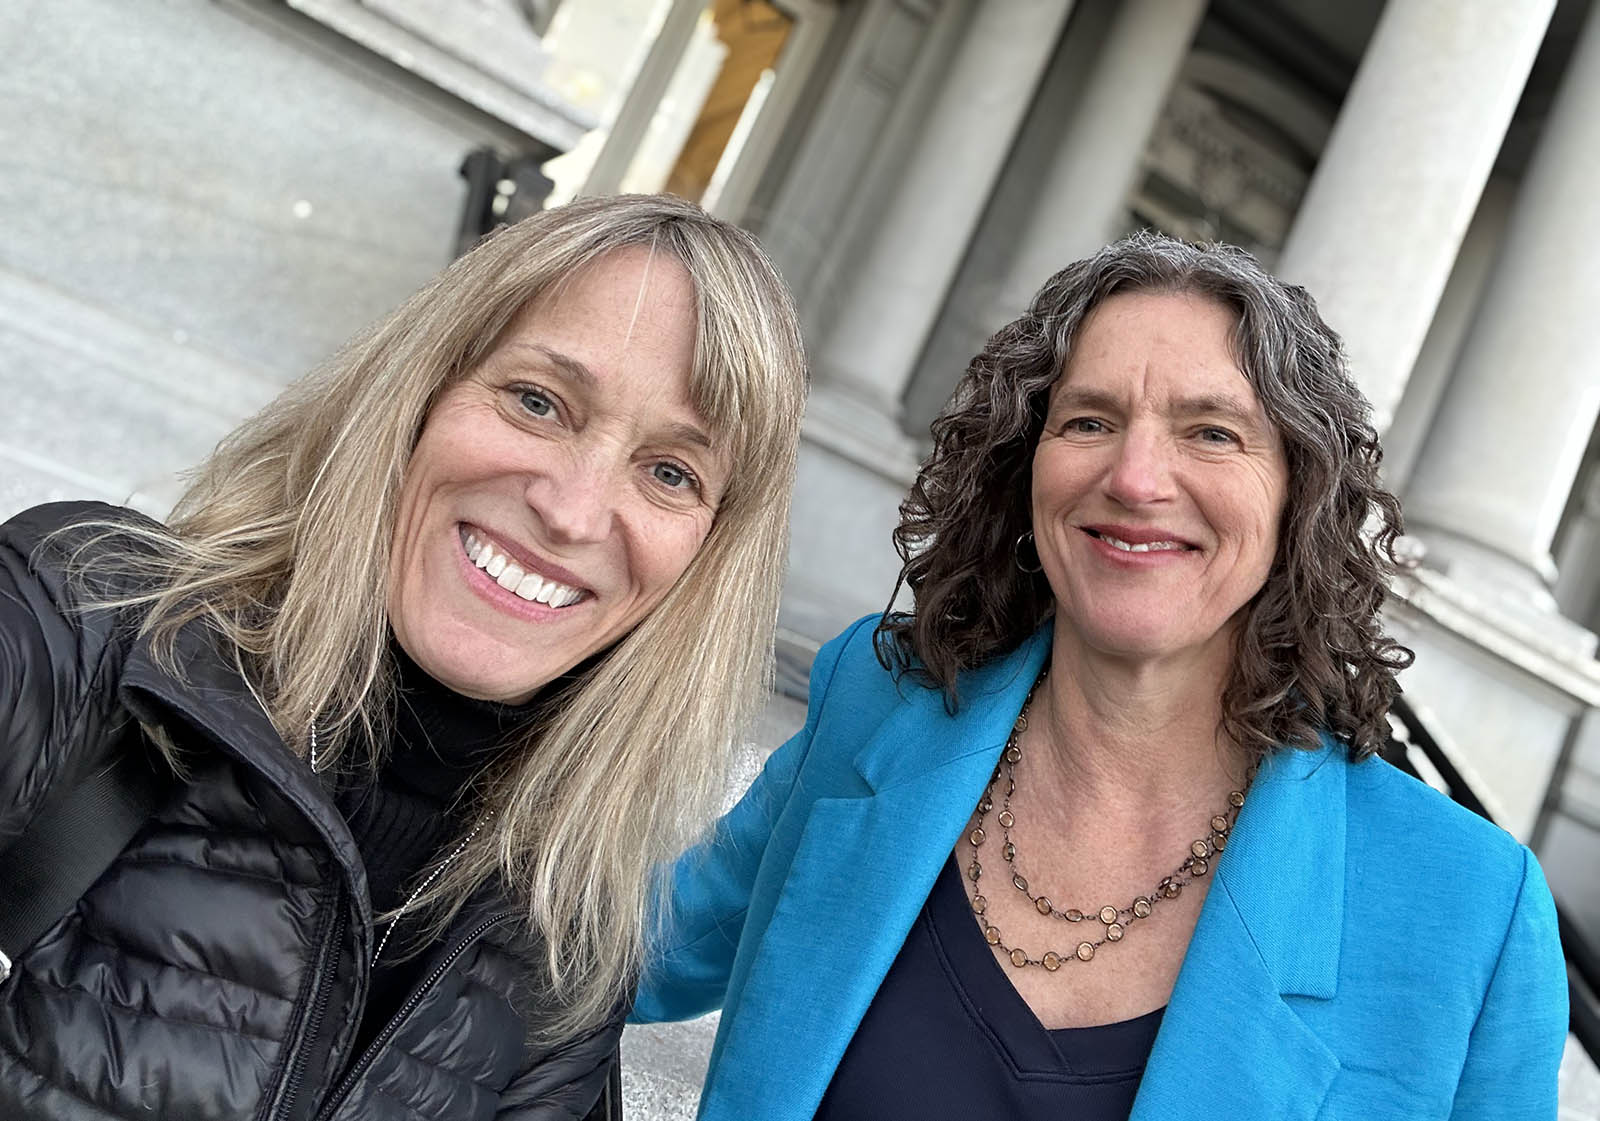 Chairwoman of the Ulster County Legislature Tracey Bartels and Ulster County Executive Jen Metzger at the “Communities in Action” event at the White House in Washington, D.C. on December 14, 2023